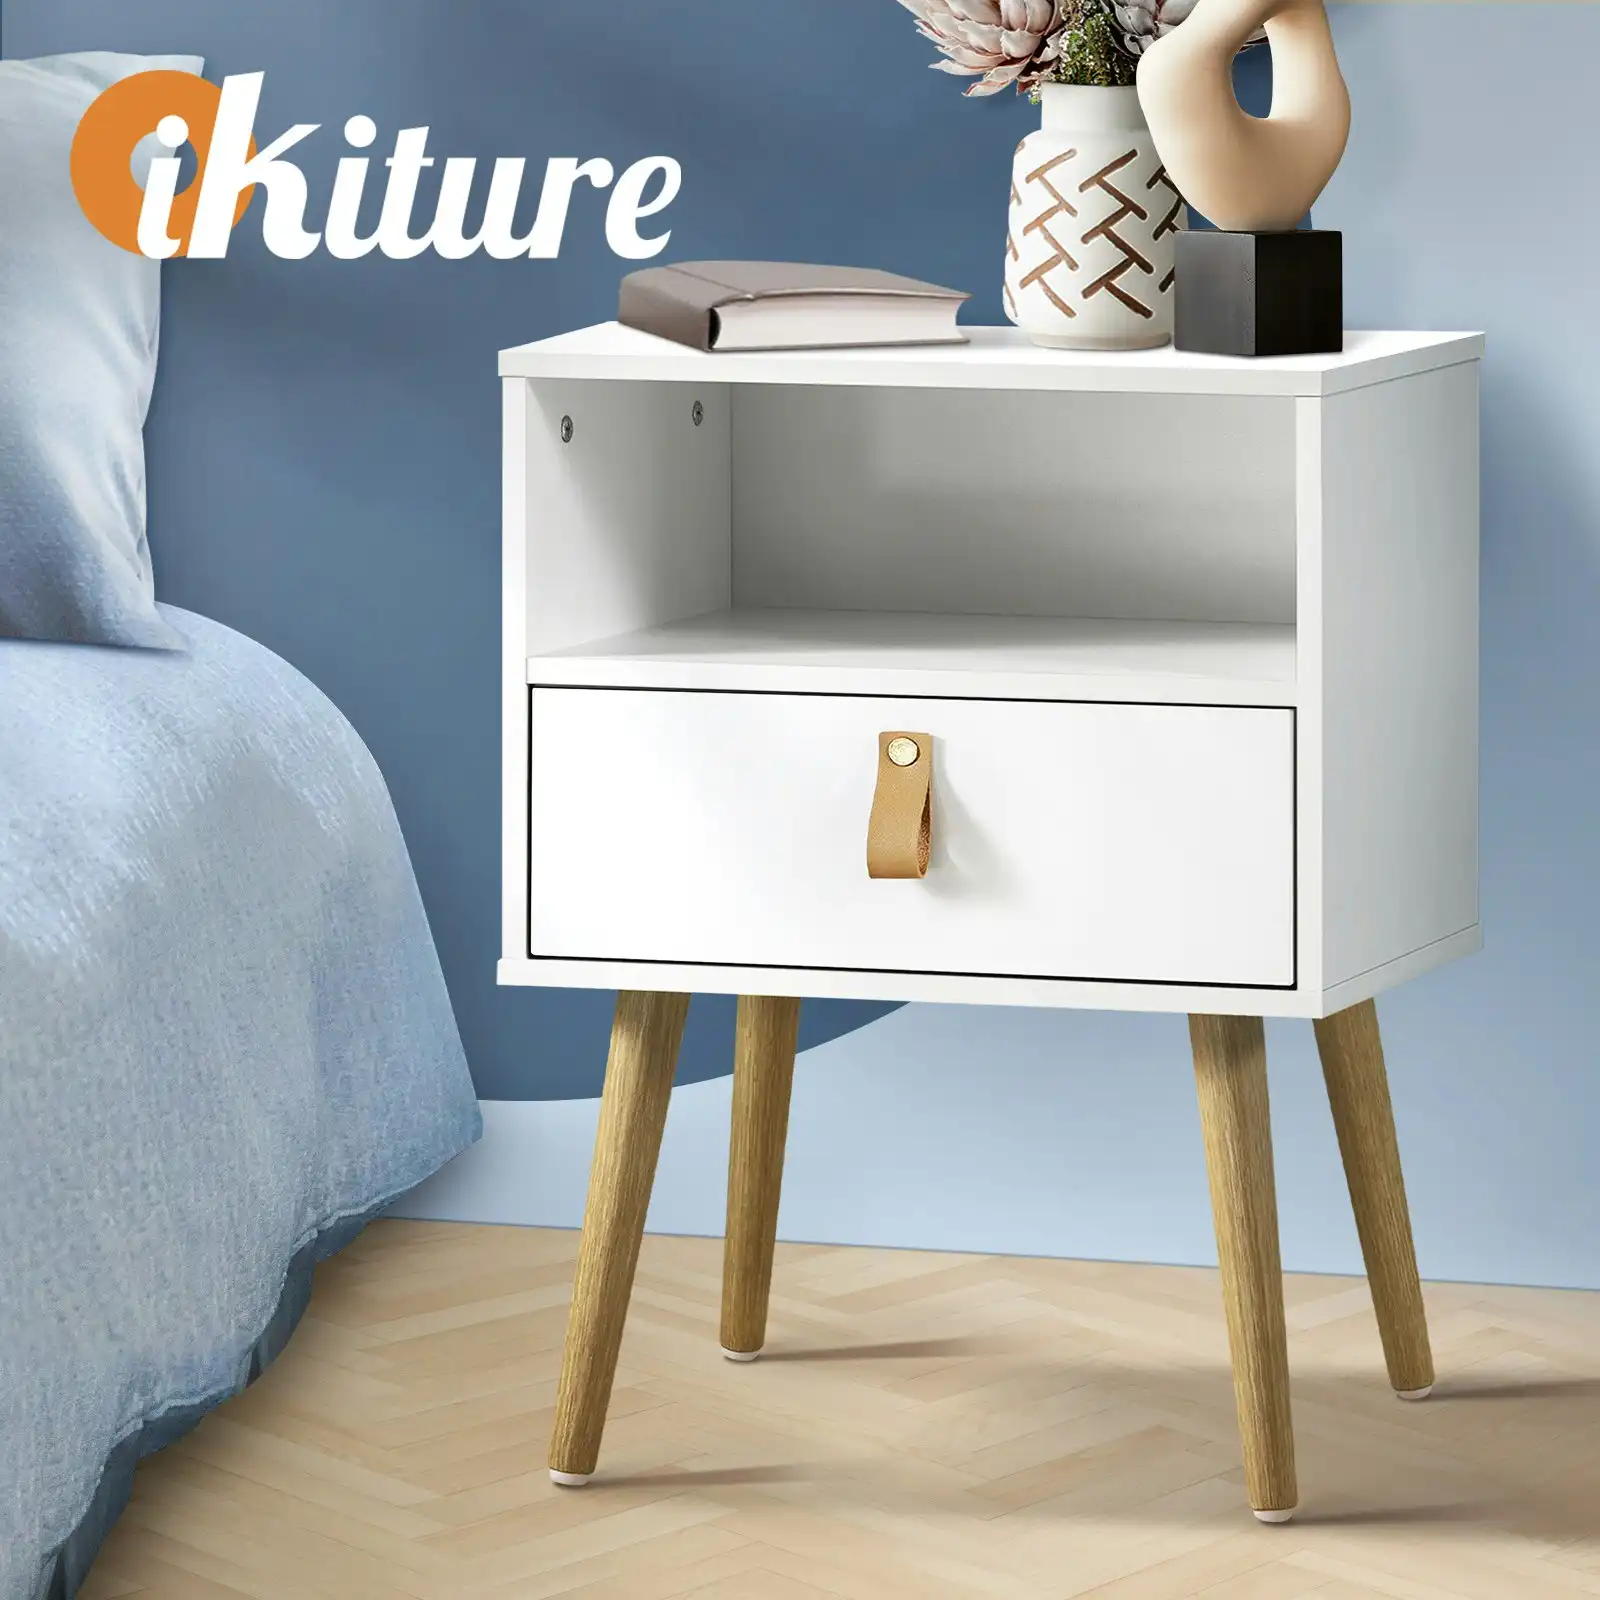 Oikiture Bedside Tables Drawers Side Table Cabinet Bedroom Nightstand White